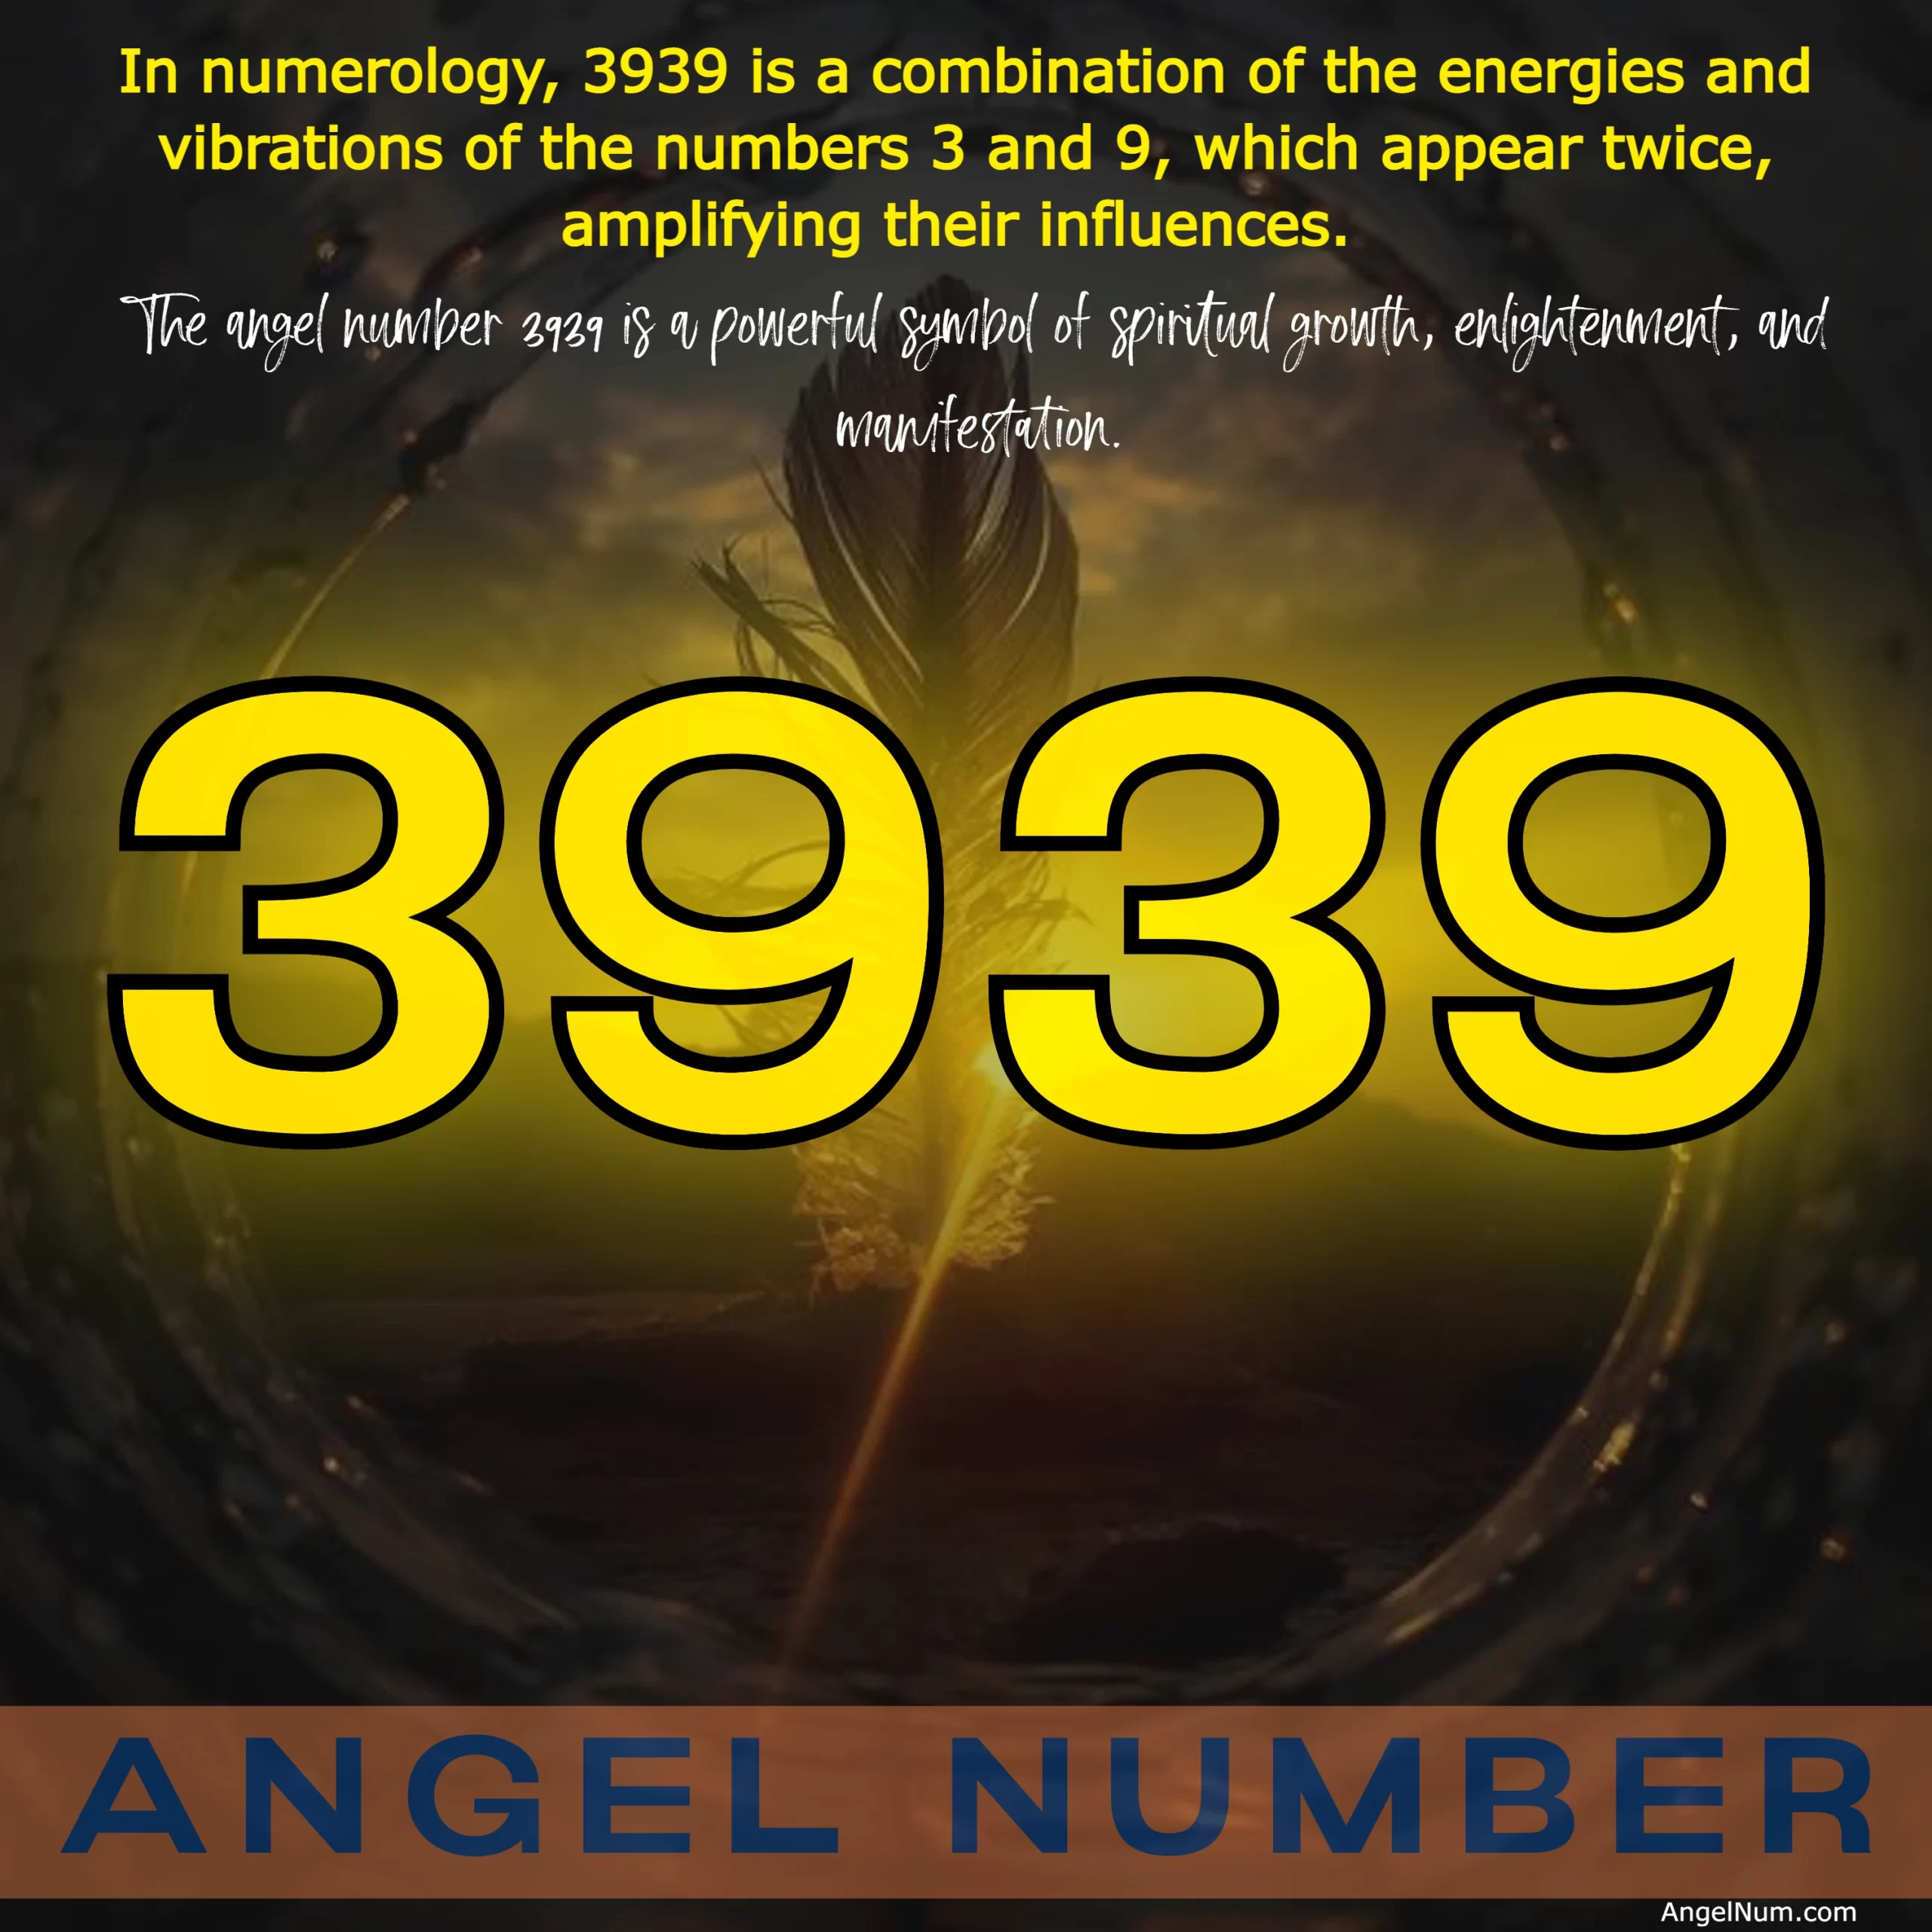 Angel Number 3939: Spiritual Growth and Manifestation